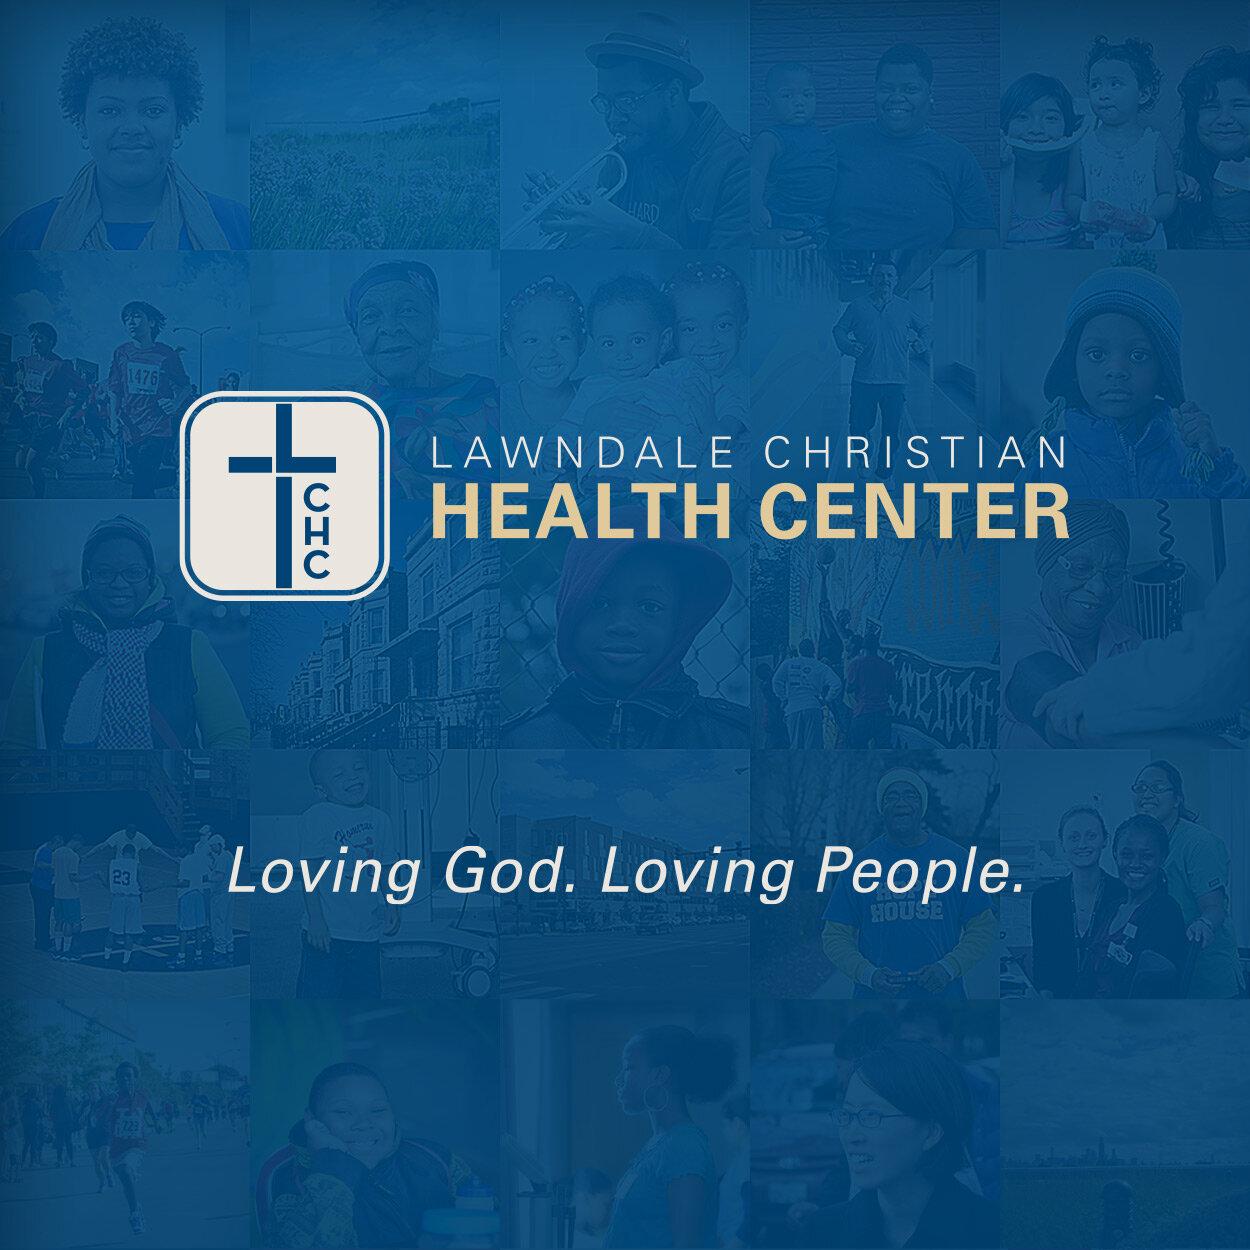 Lawndale Christian Health Center – Quality, Affordable Healthcare